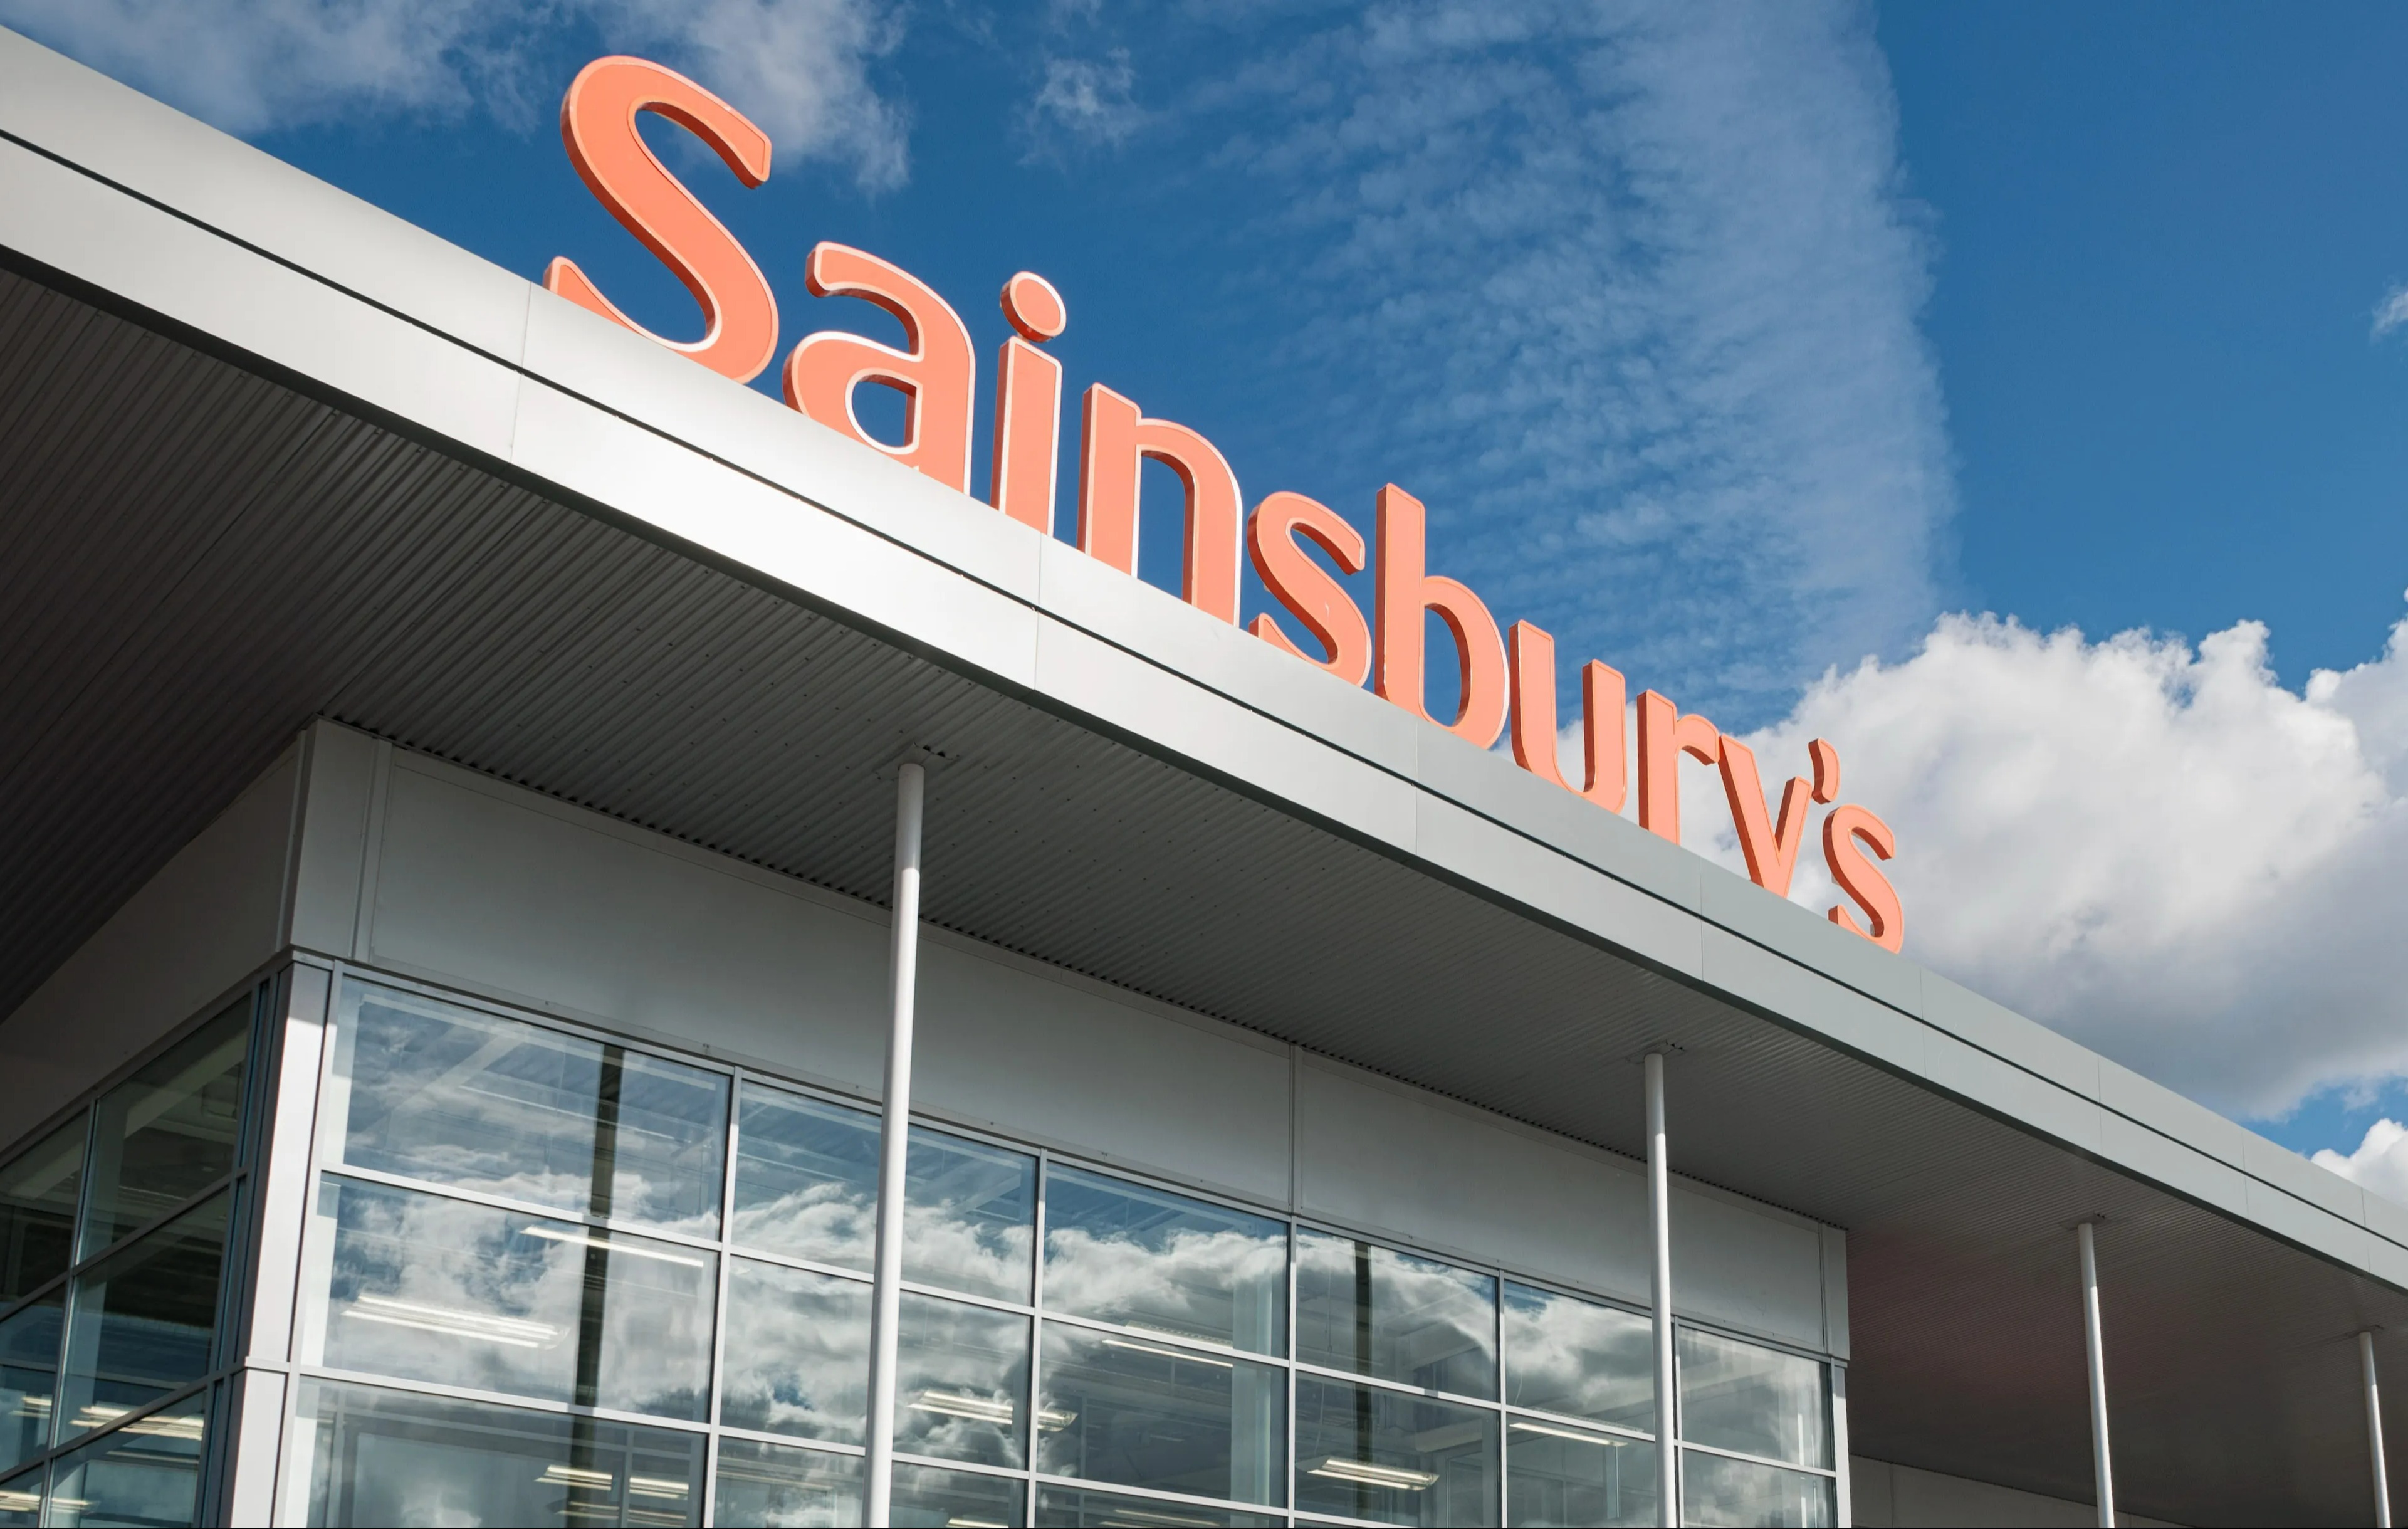 Sainsbury's has unveiled plans to overhaul its supermarkets with a focus on creating more food space